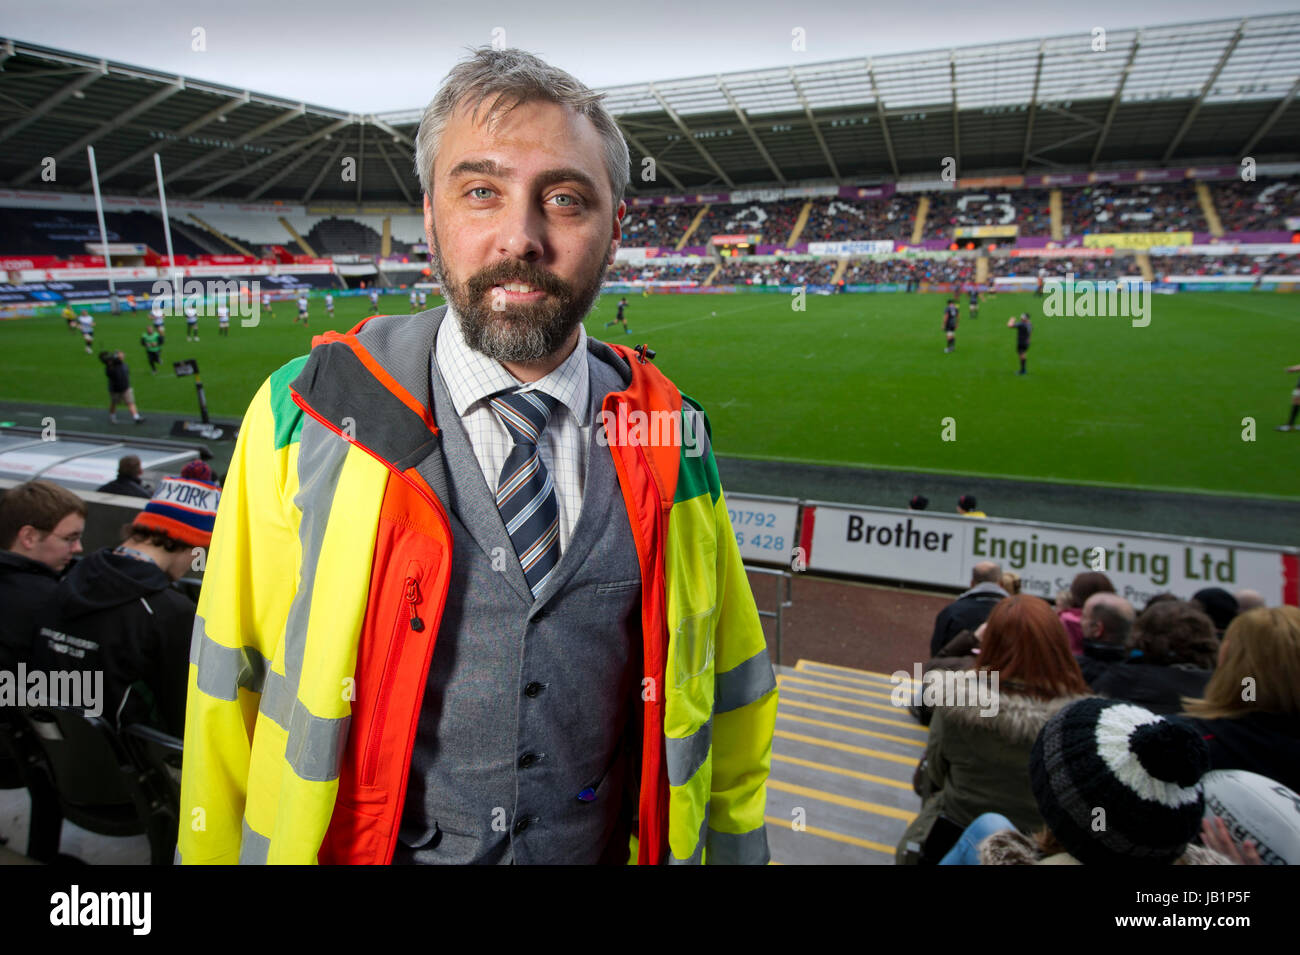 Dr.Russell Clark, a general practitioner who works as a duty doctor at rugby matches at the Liberty Stadium, Swansea, Wales. Stock Photo